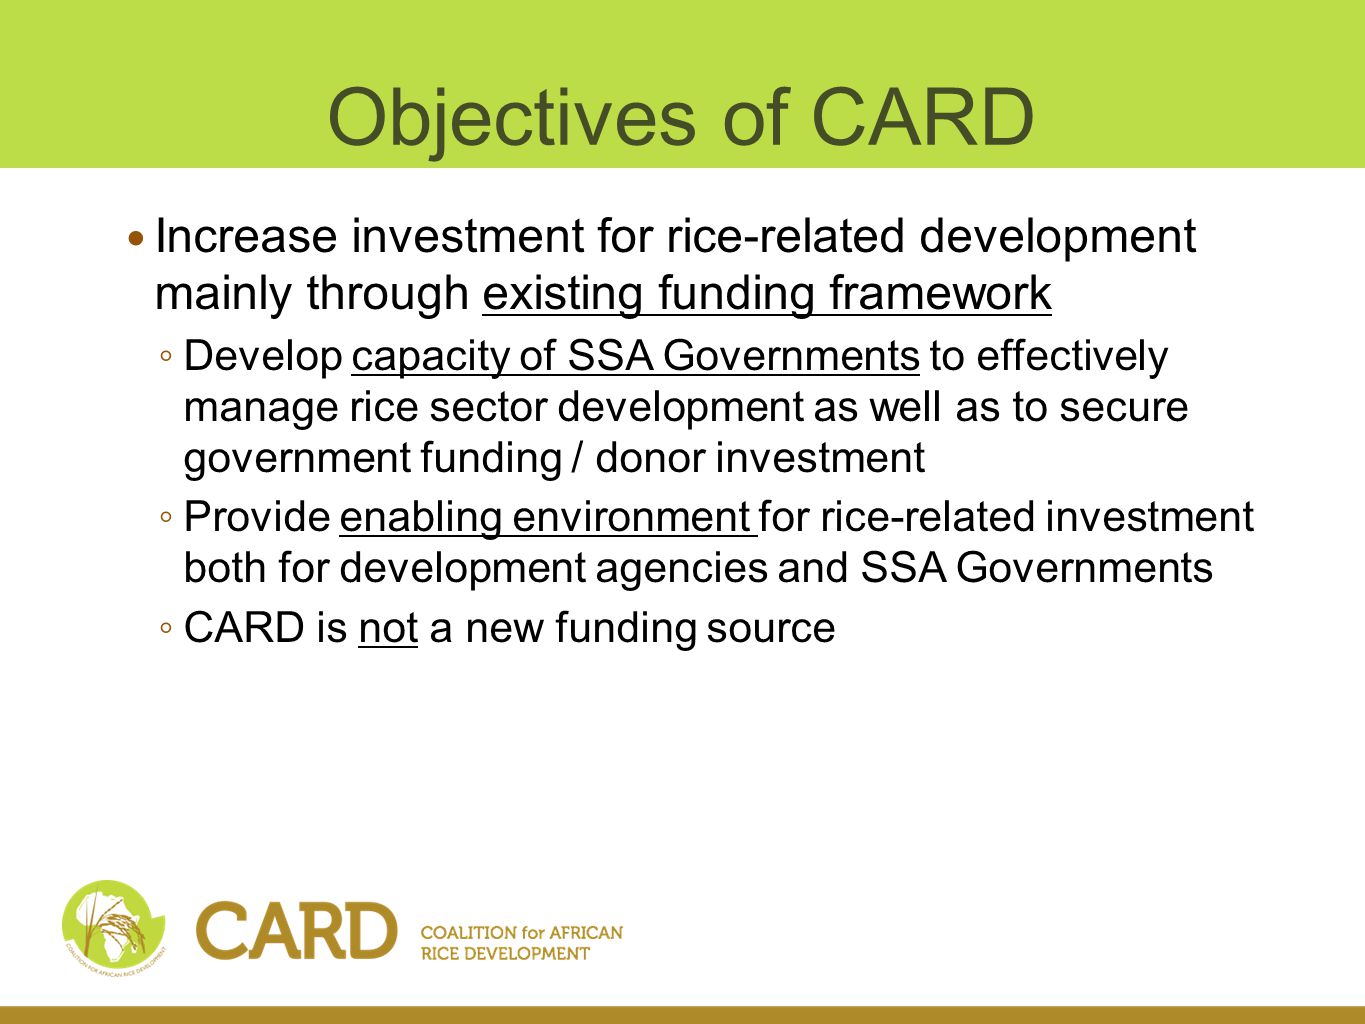 Objectives of CARD Increase investment for rice-related development mainly through existing funding framework Develop capacity of SSA Governments to effectively manage rice sector development as well as to secure government funding / donor investment Provide enabling environment for rice-related investment both for development agencies and SSA Governments CARD is not a new funding source